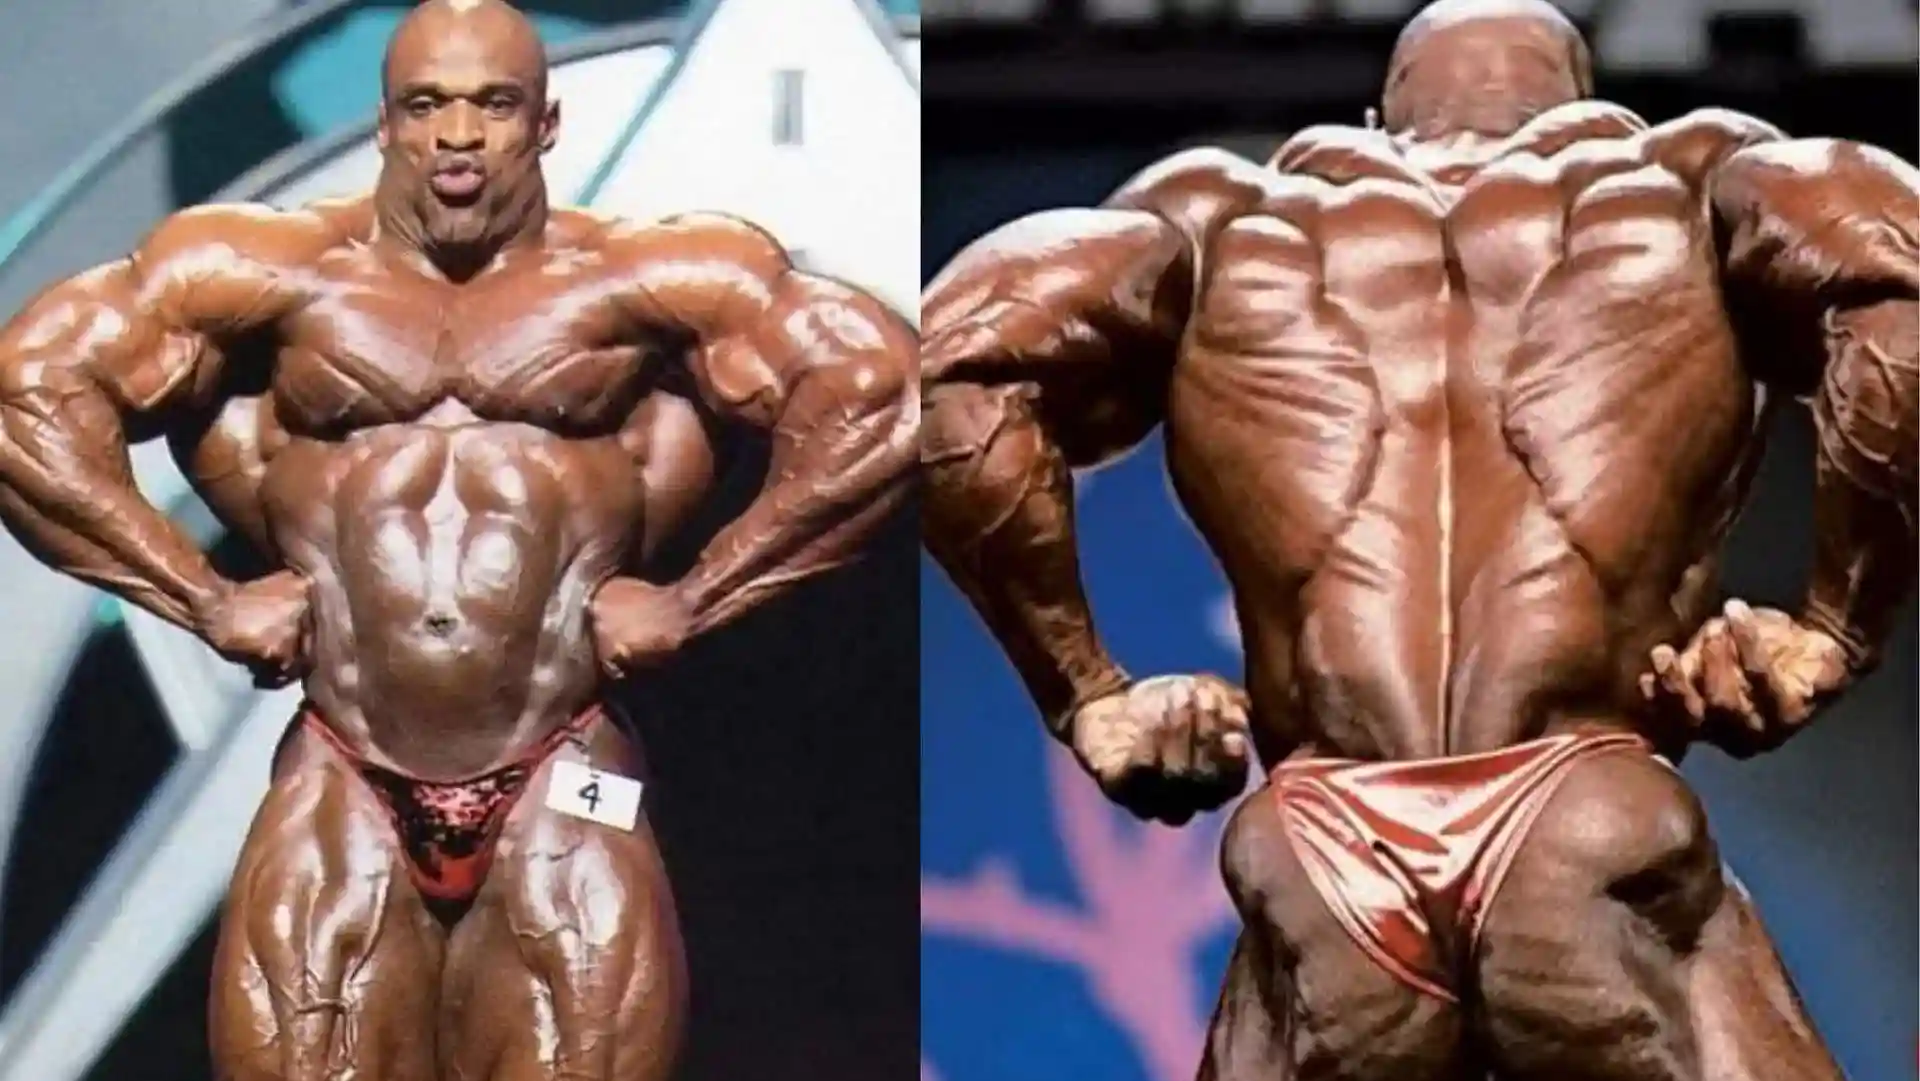 Ronnie Coleman- The Bodybuilder and Mr Olympia